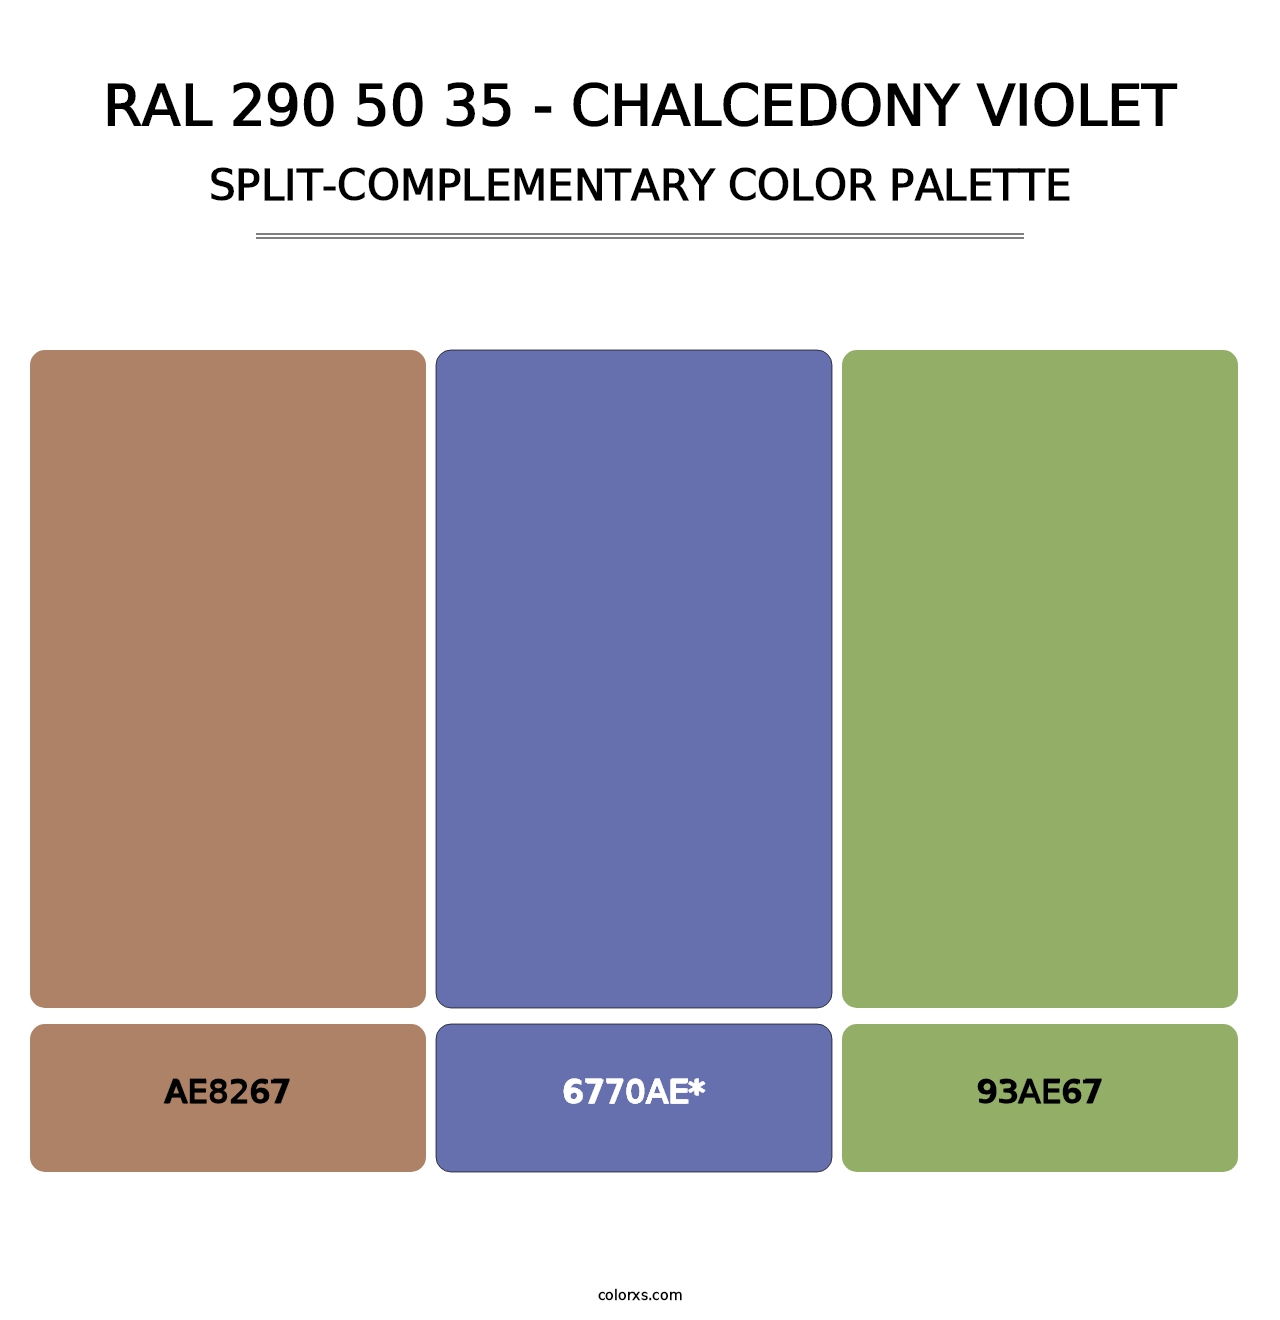 RAL 290 50 35 - Chalcedony Violet - Split-Complementary Color Palette